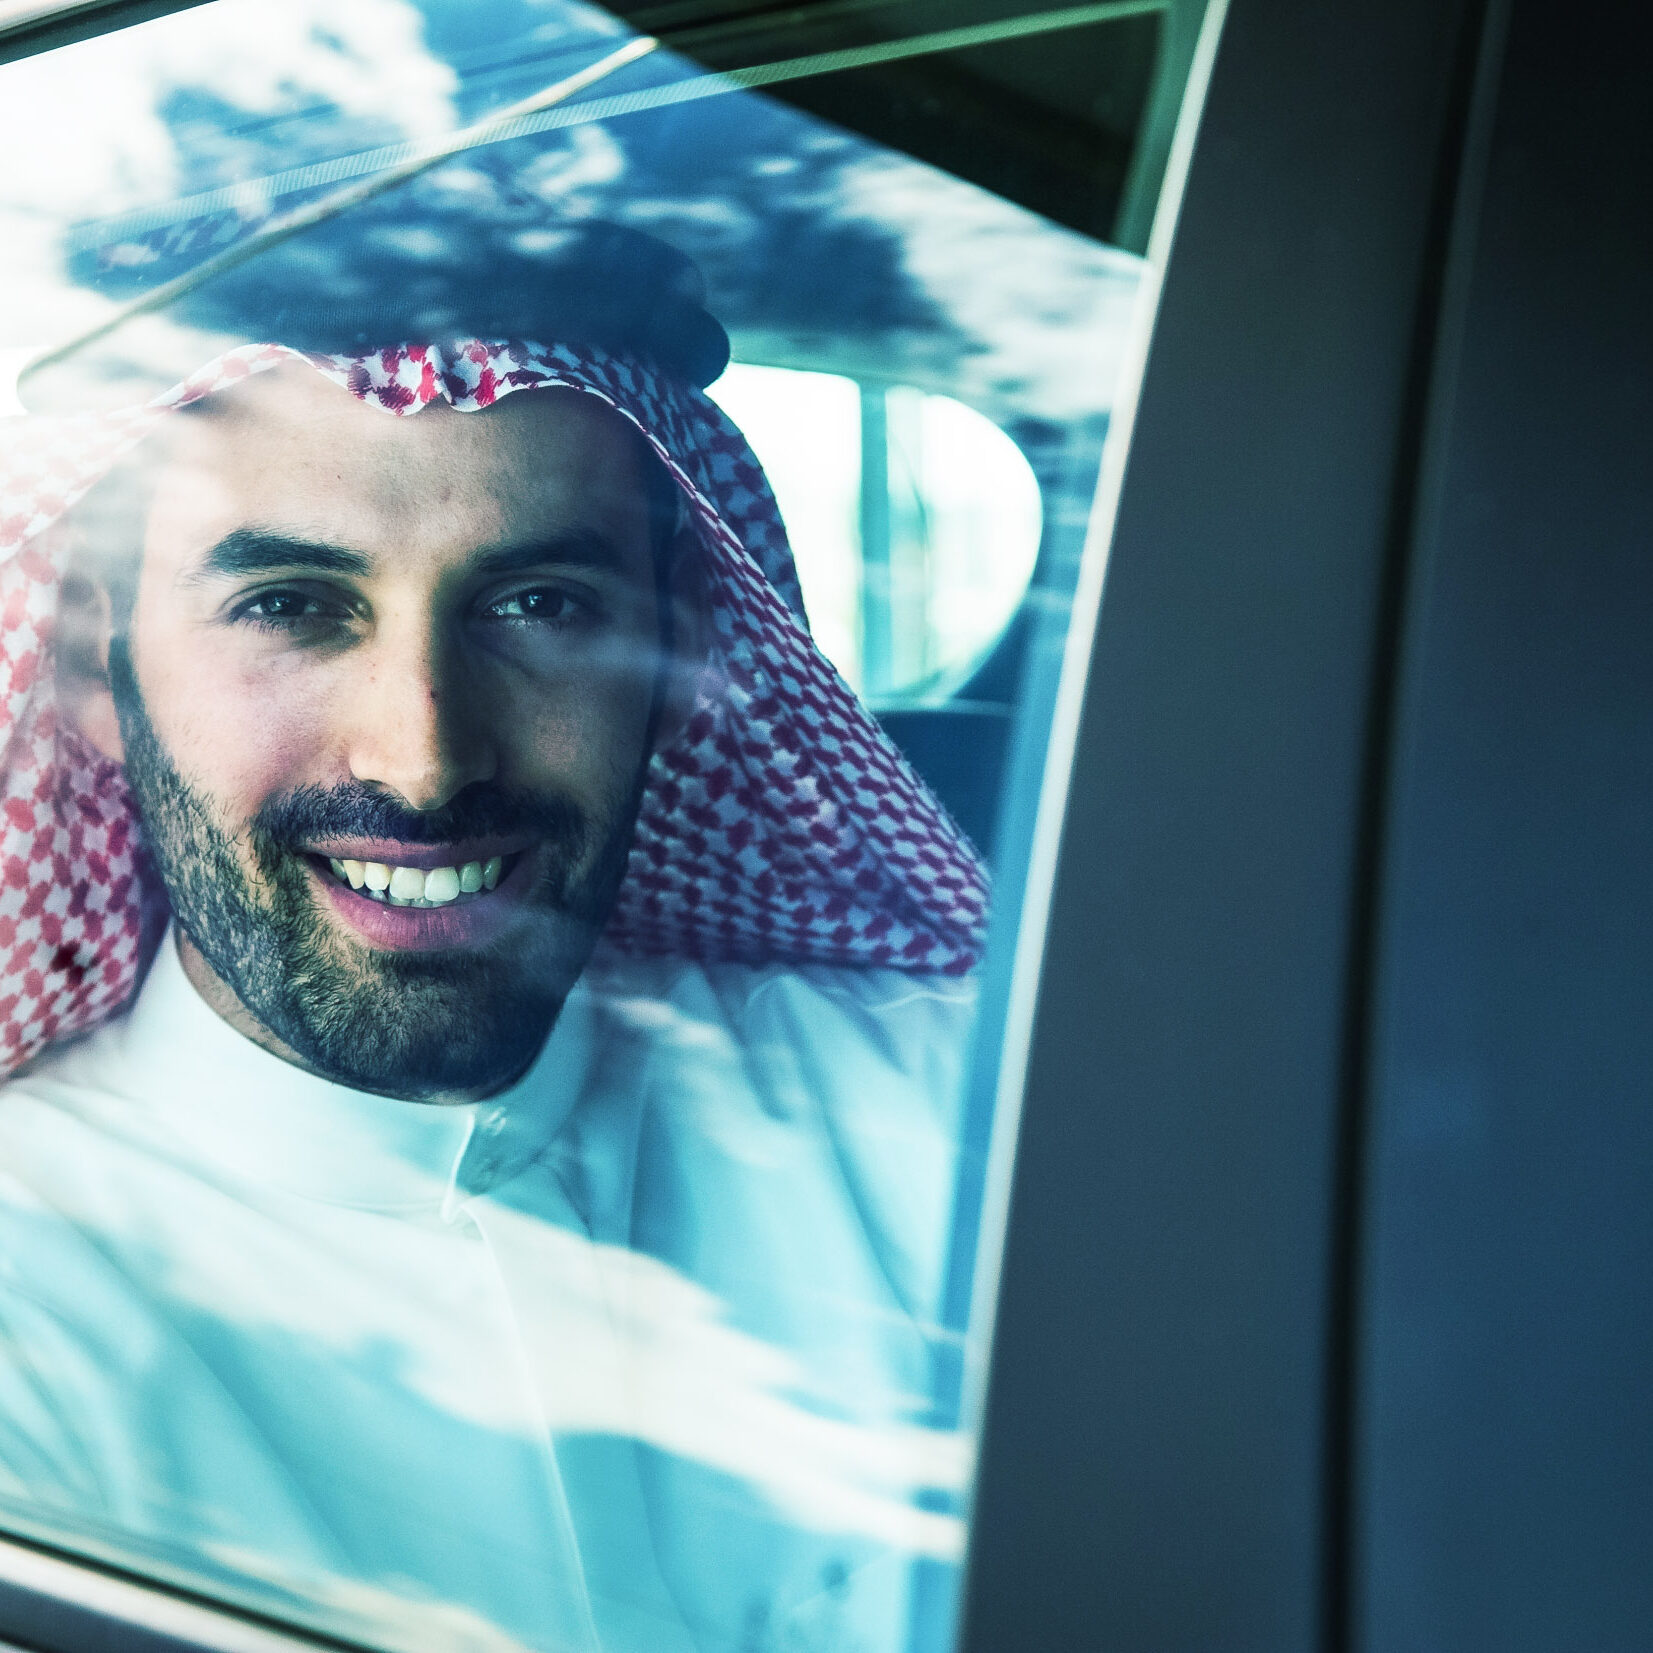 Man from Saudi looking out car window